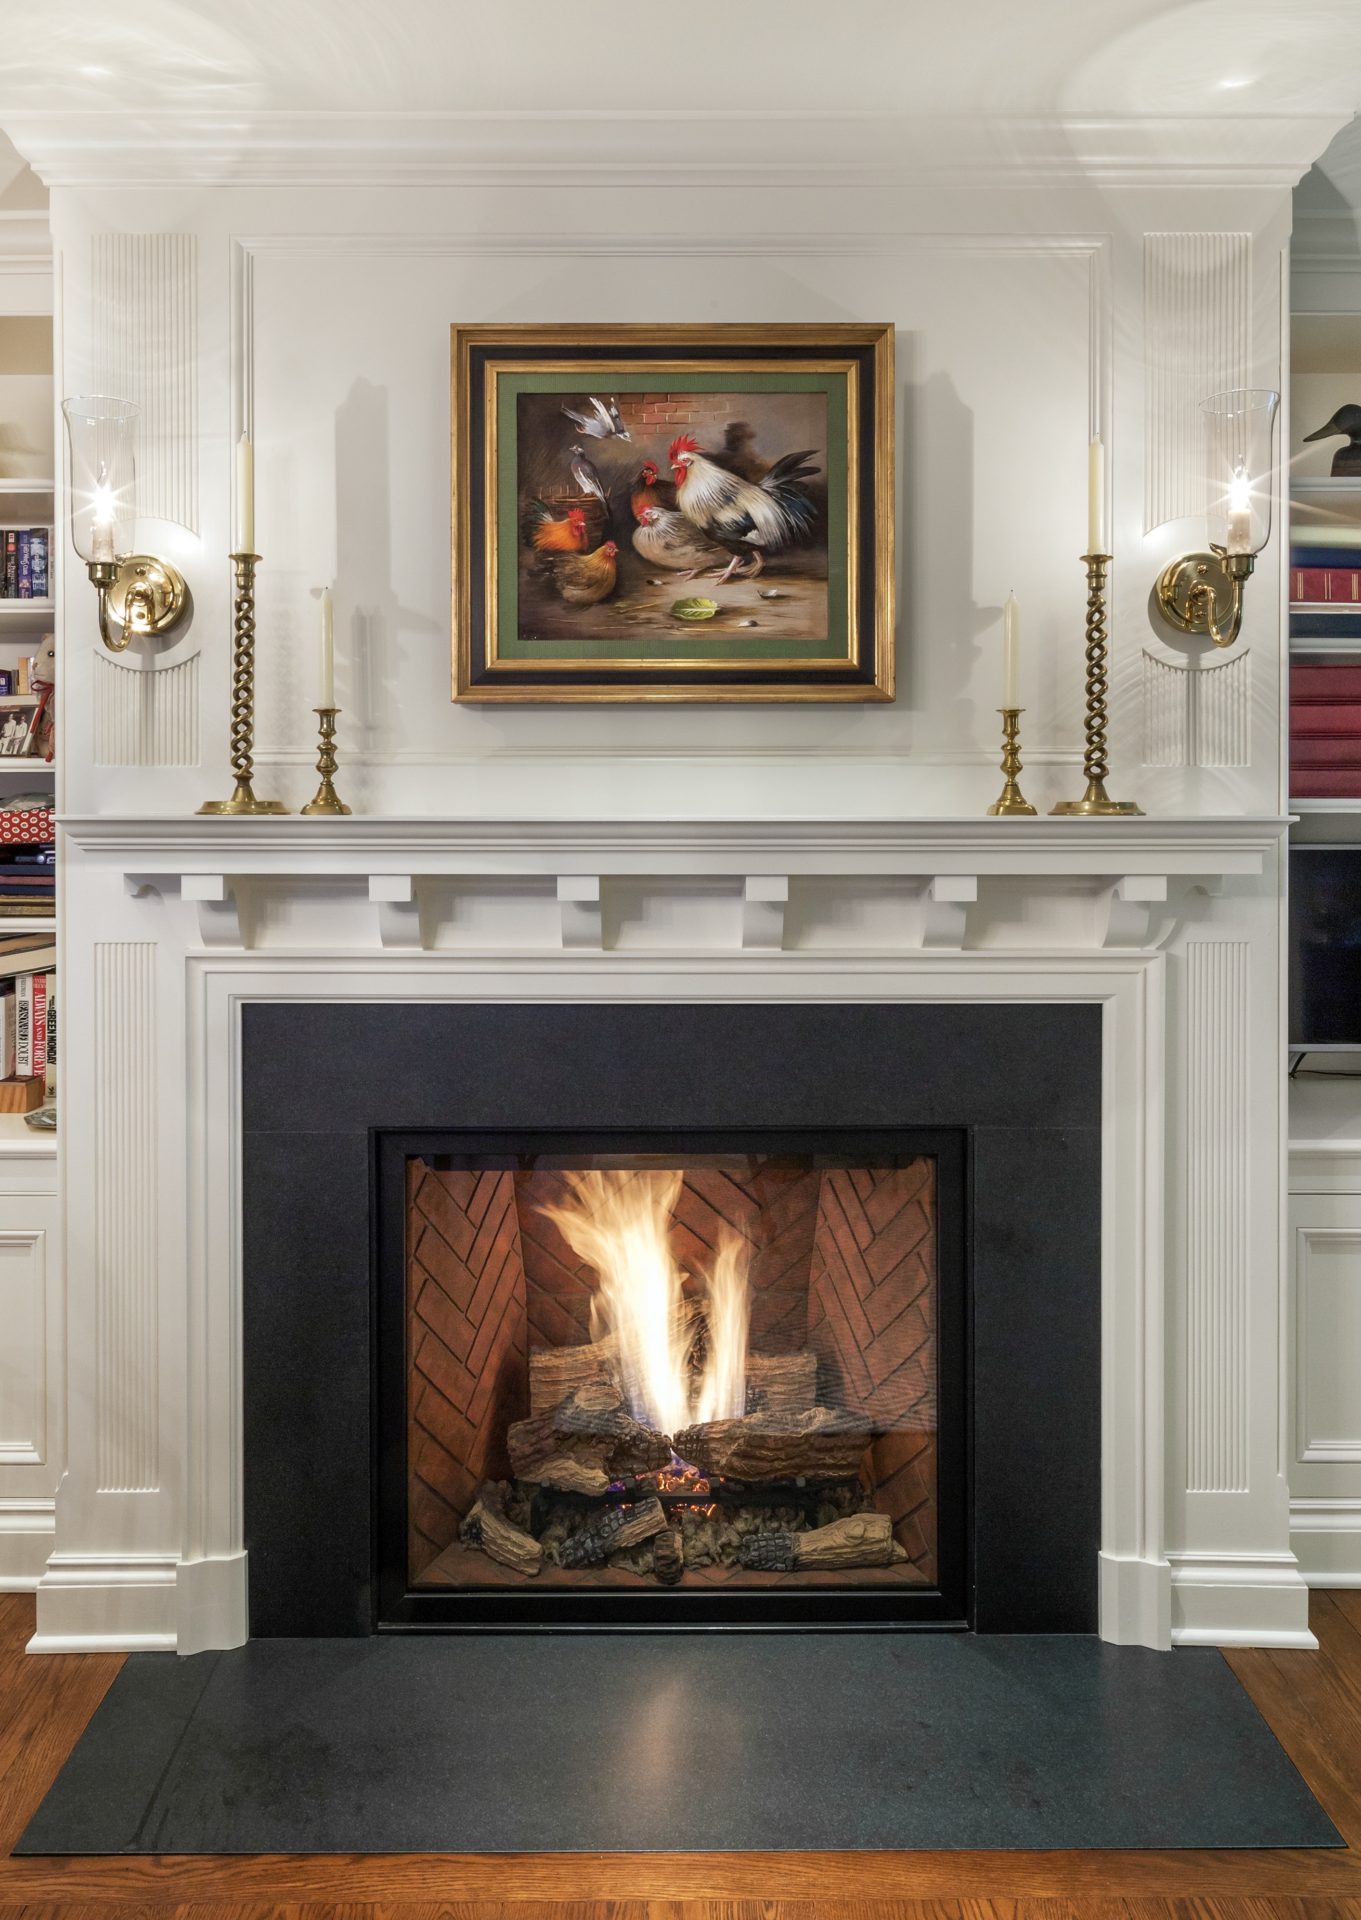 How To Clean Black Slate Fireplace Surround – Fireplace Guide by Linda